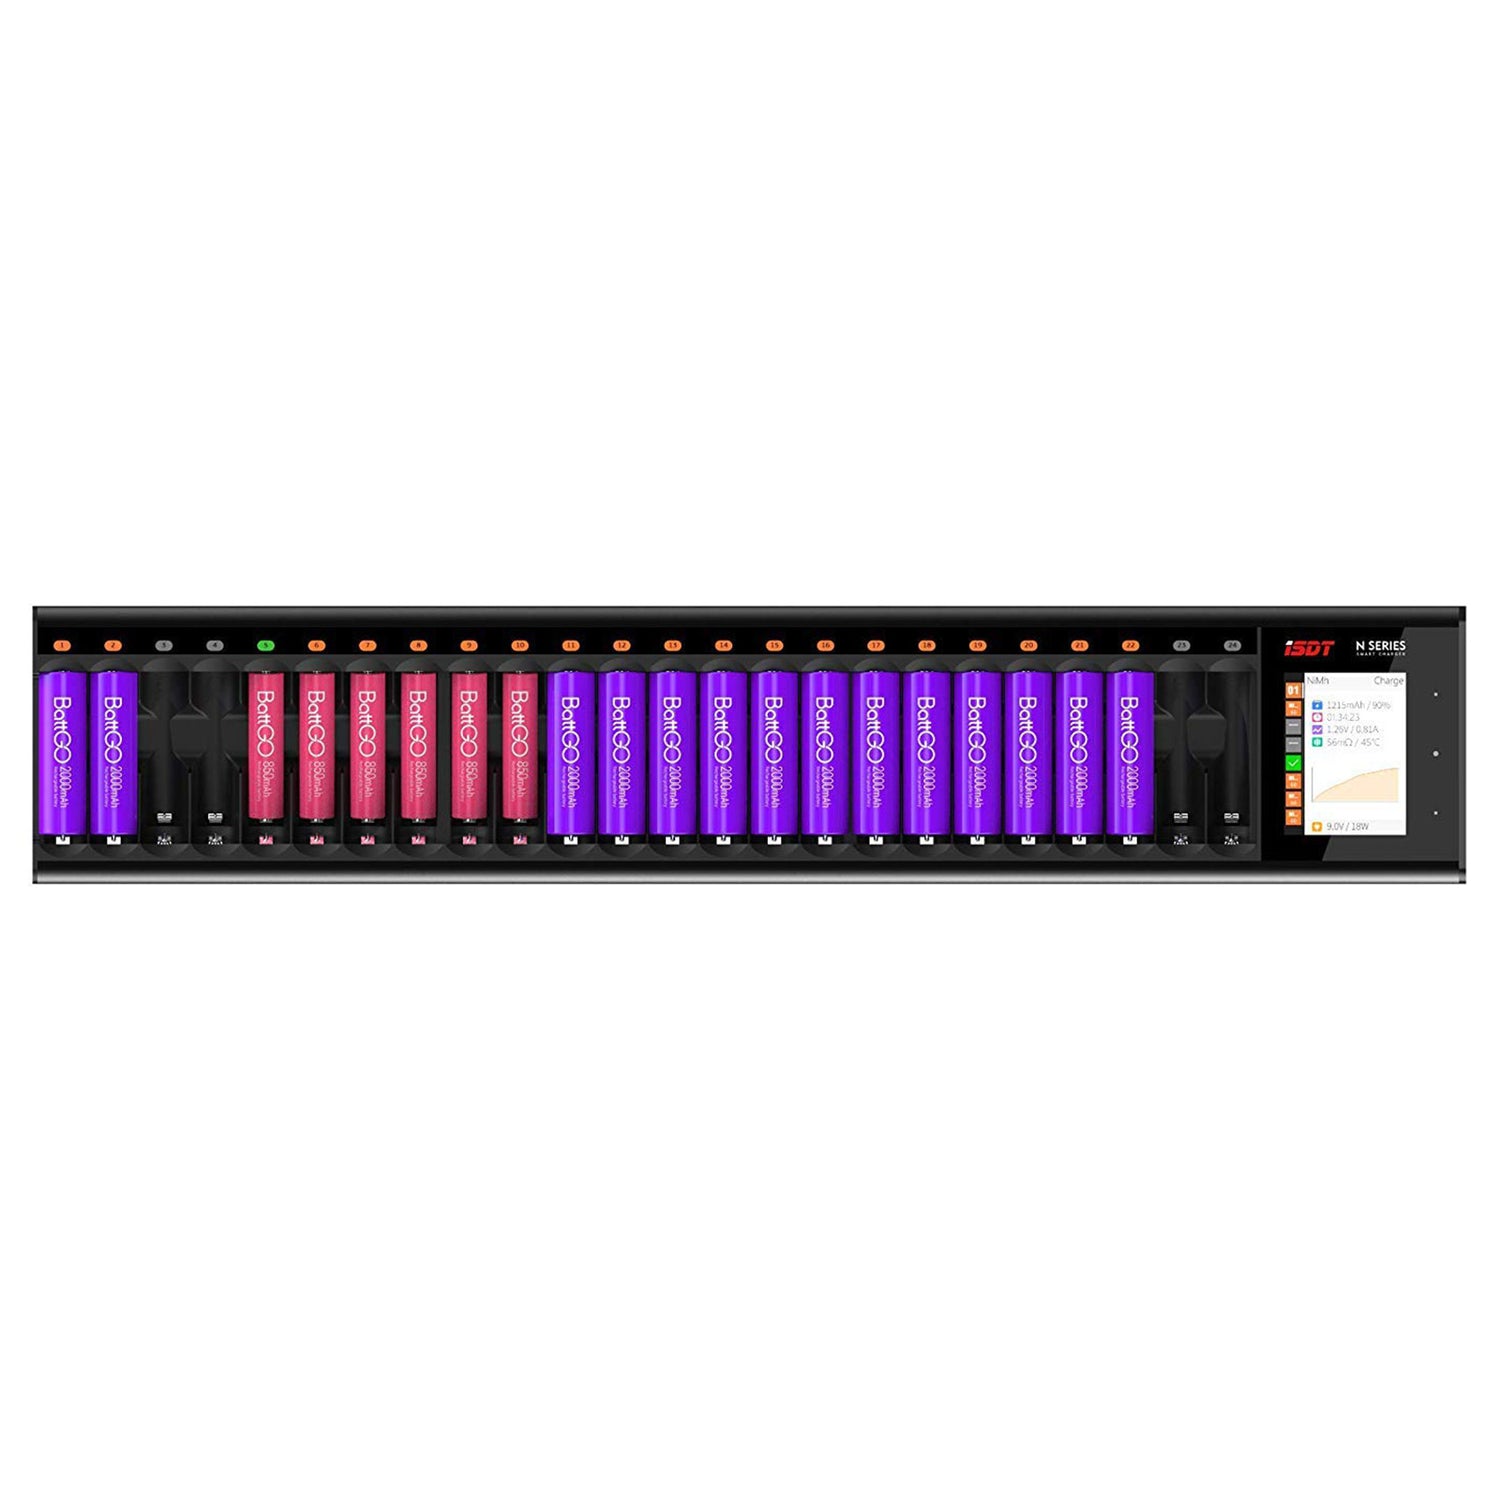 N24 LCD 24-Slot Battery Charger for Rechargeable Batteries, 48W Fast Charger for AA/AAA Batteries